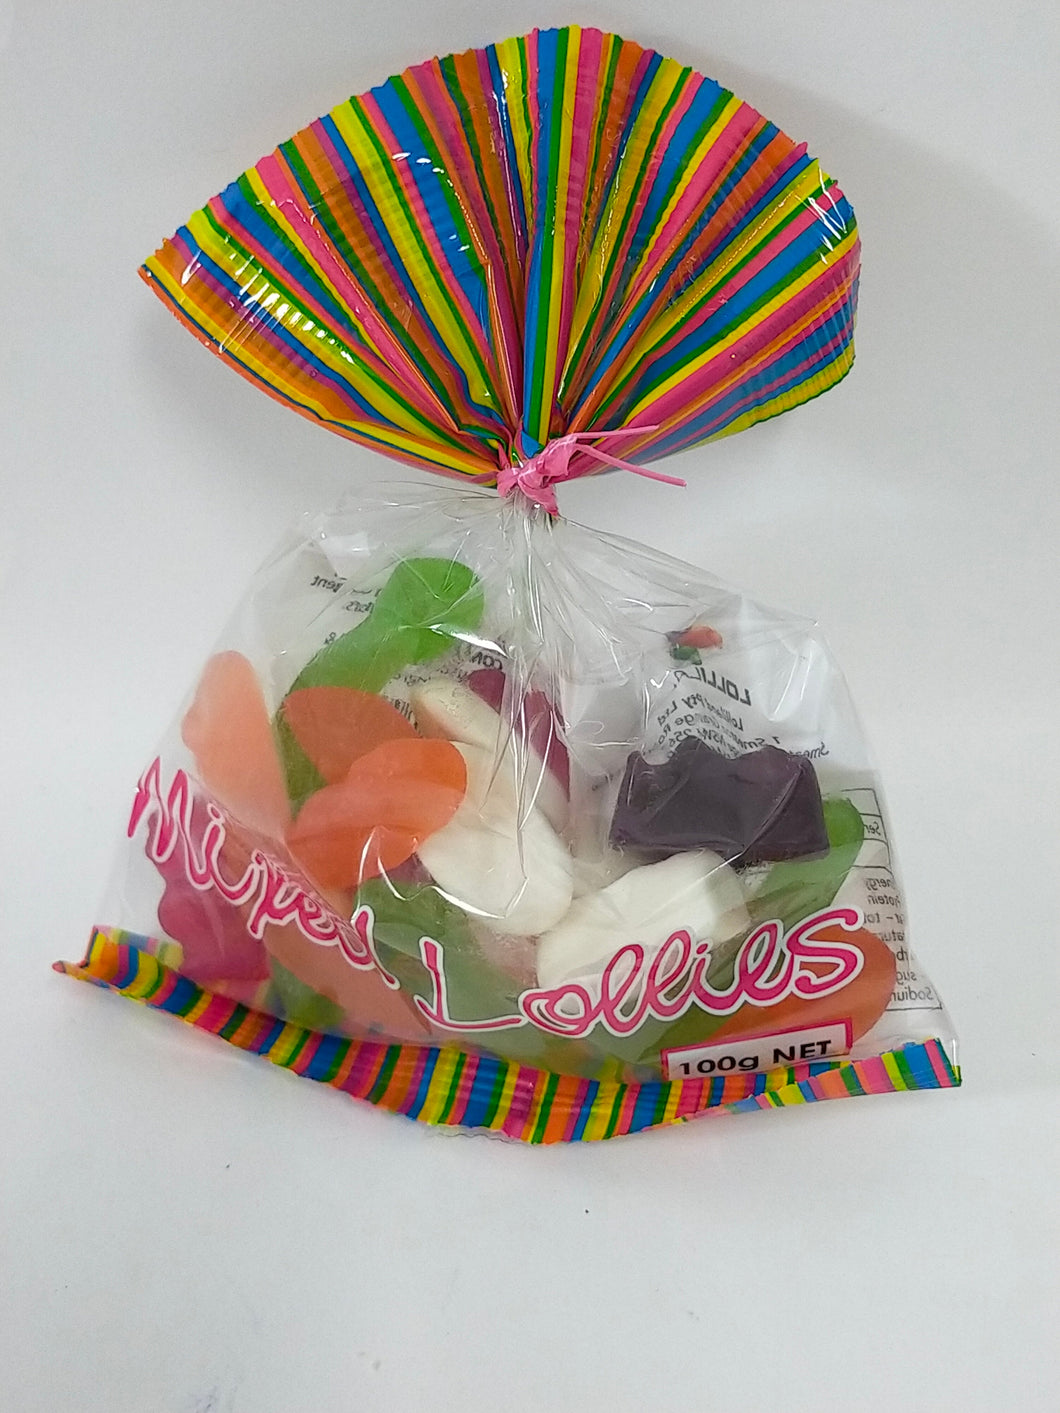 Party Mix Lolly Bags 20 x 100g - Sunshine Confectionery